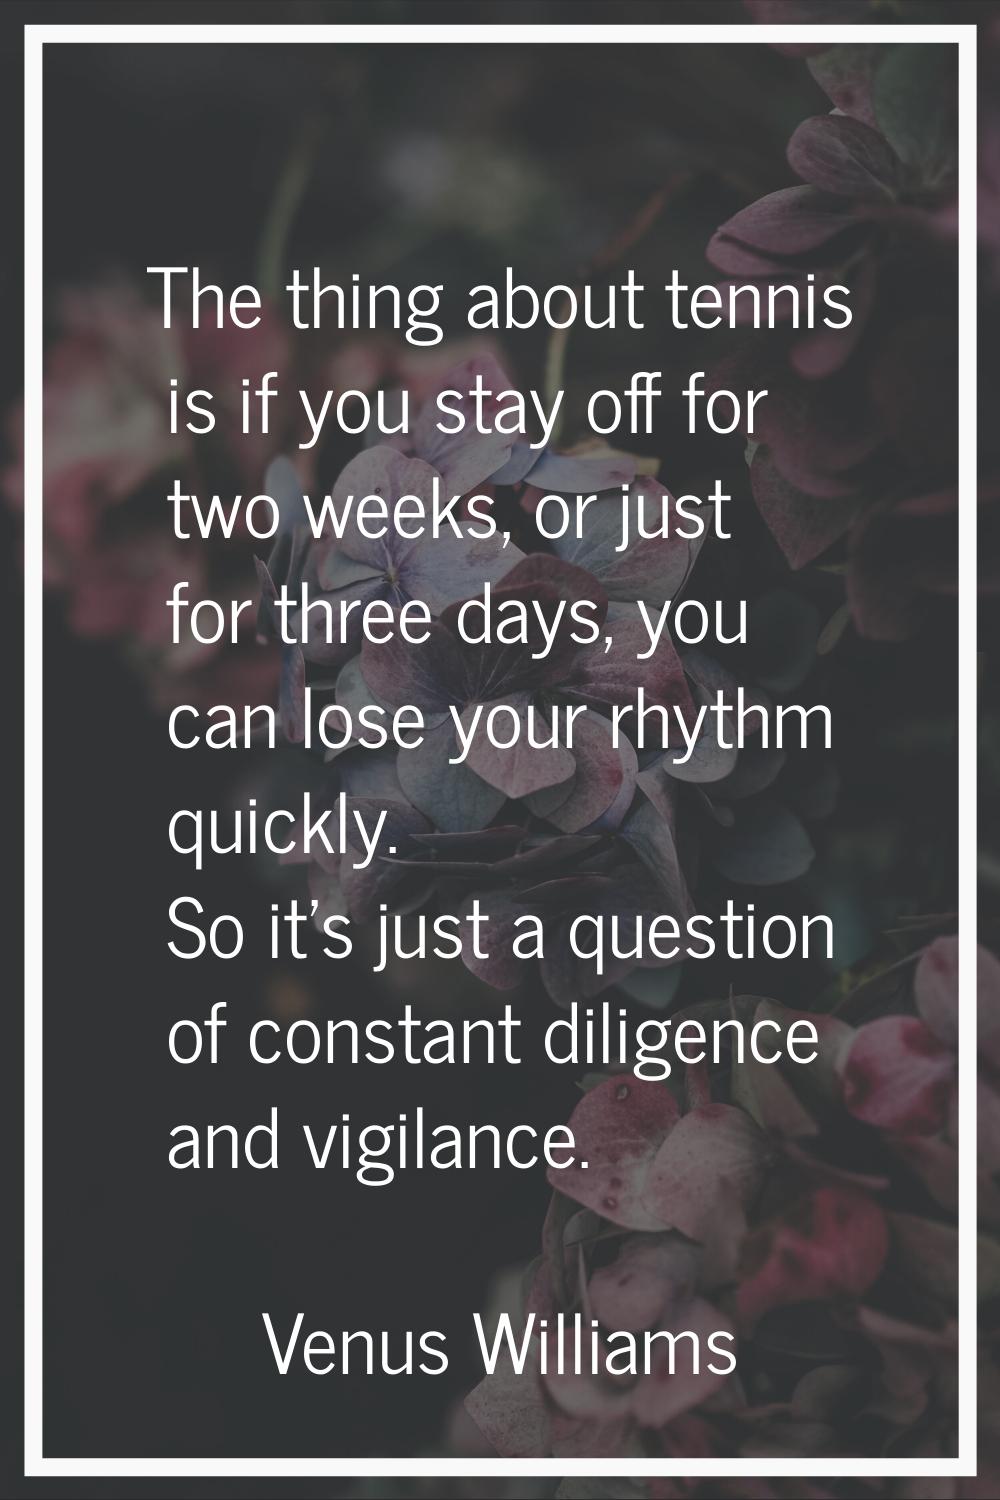 The thing about tennis is if you stay off for two weeks, or just for three days, you can lose your 